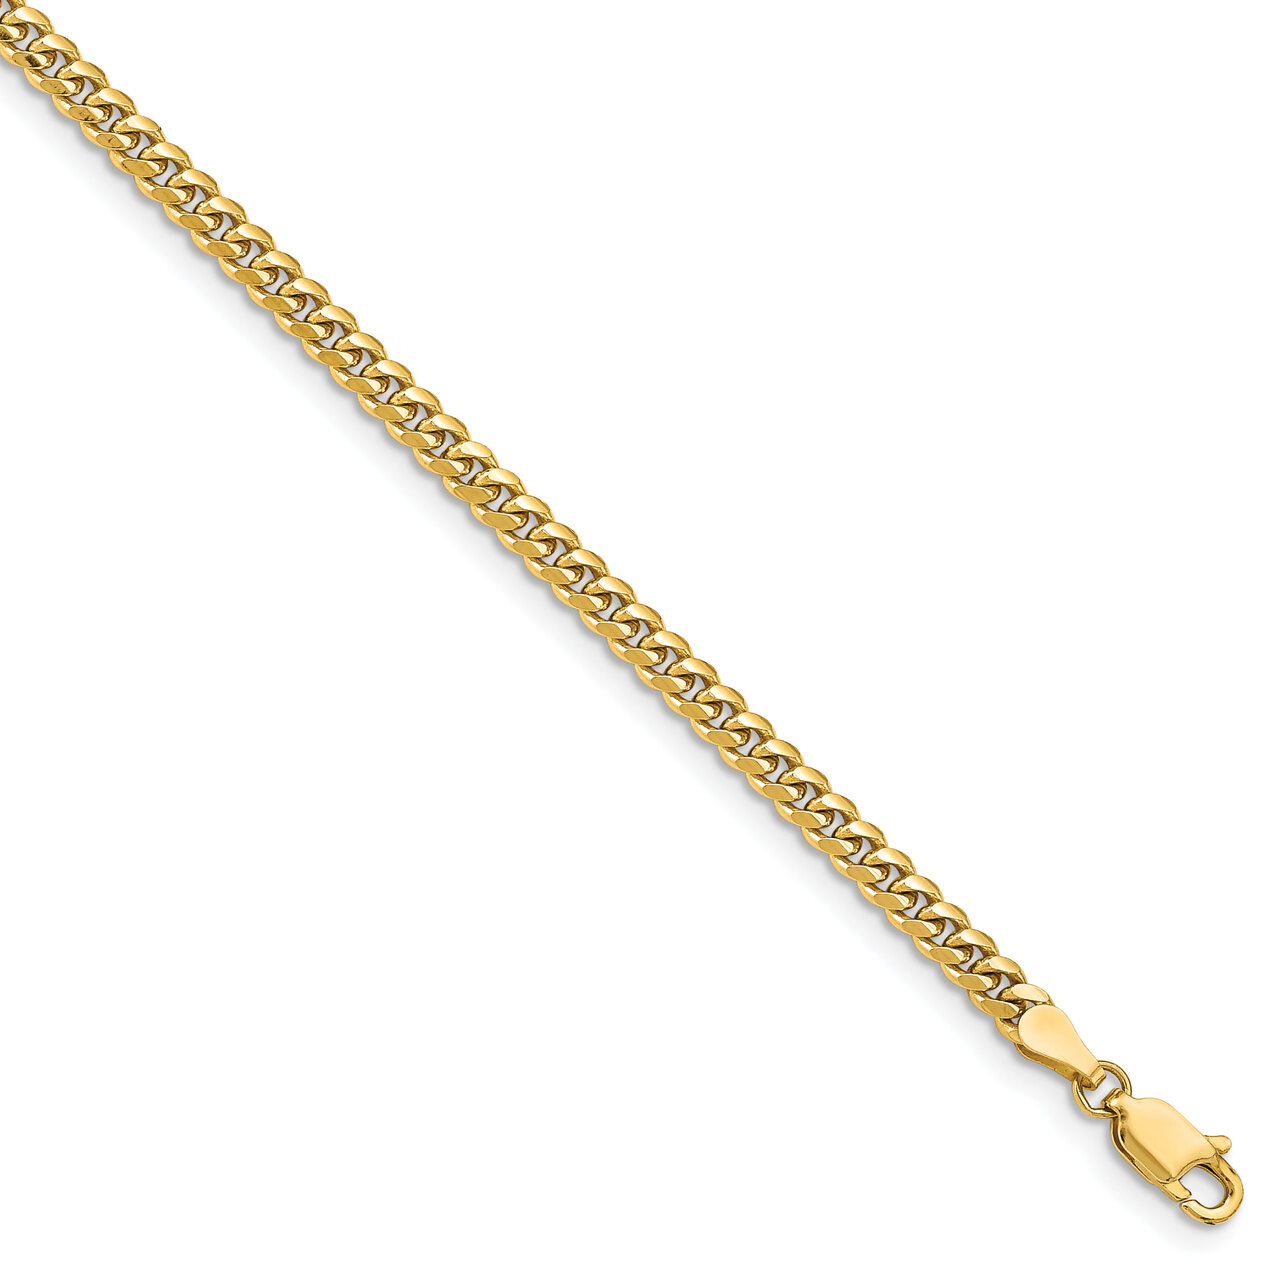 7 Inch 3.5mm Solid Miami Cuban Chain 14k Yellow Gold DCU100-7